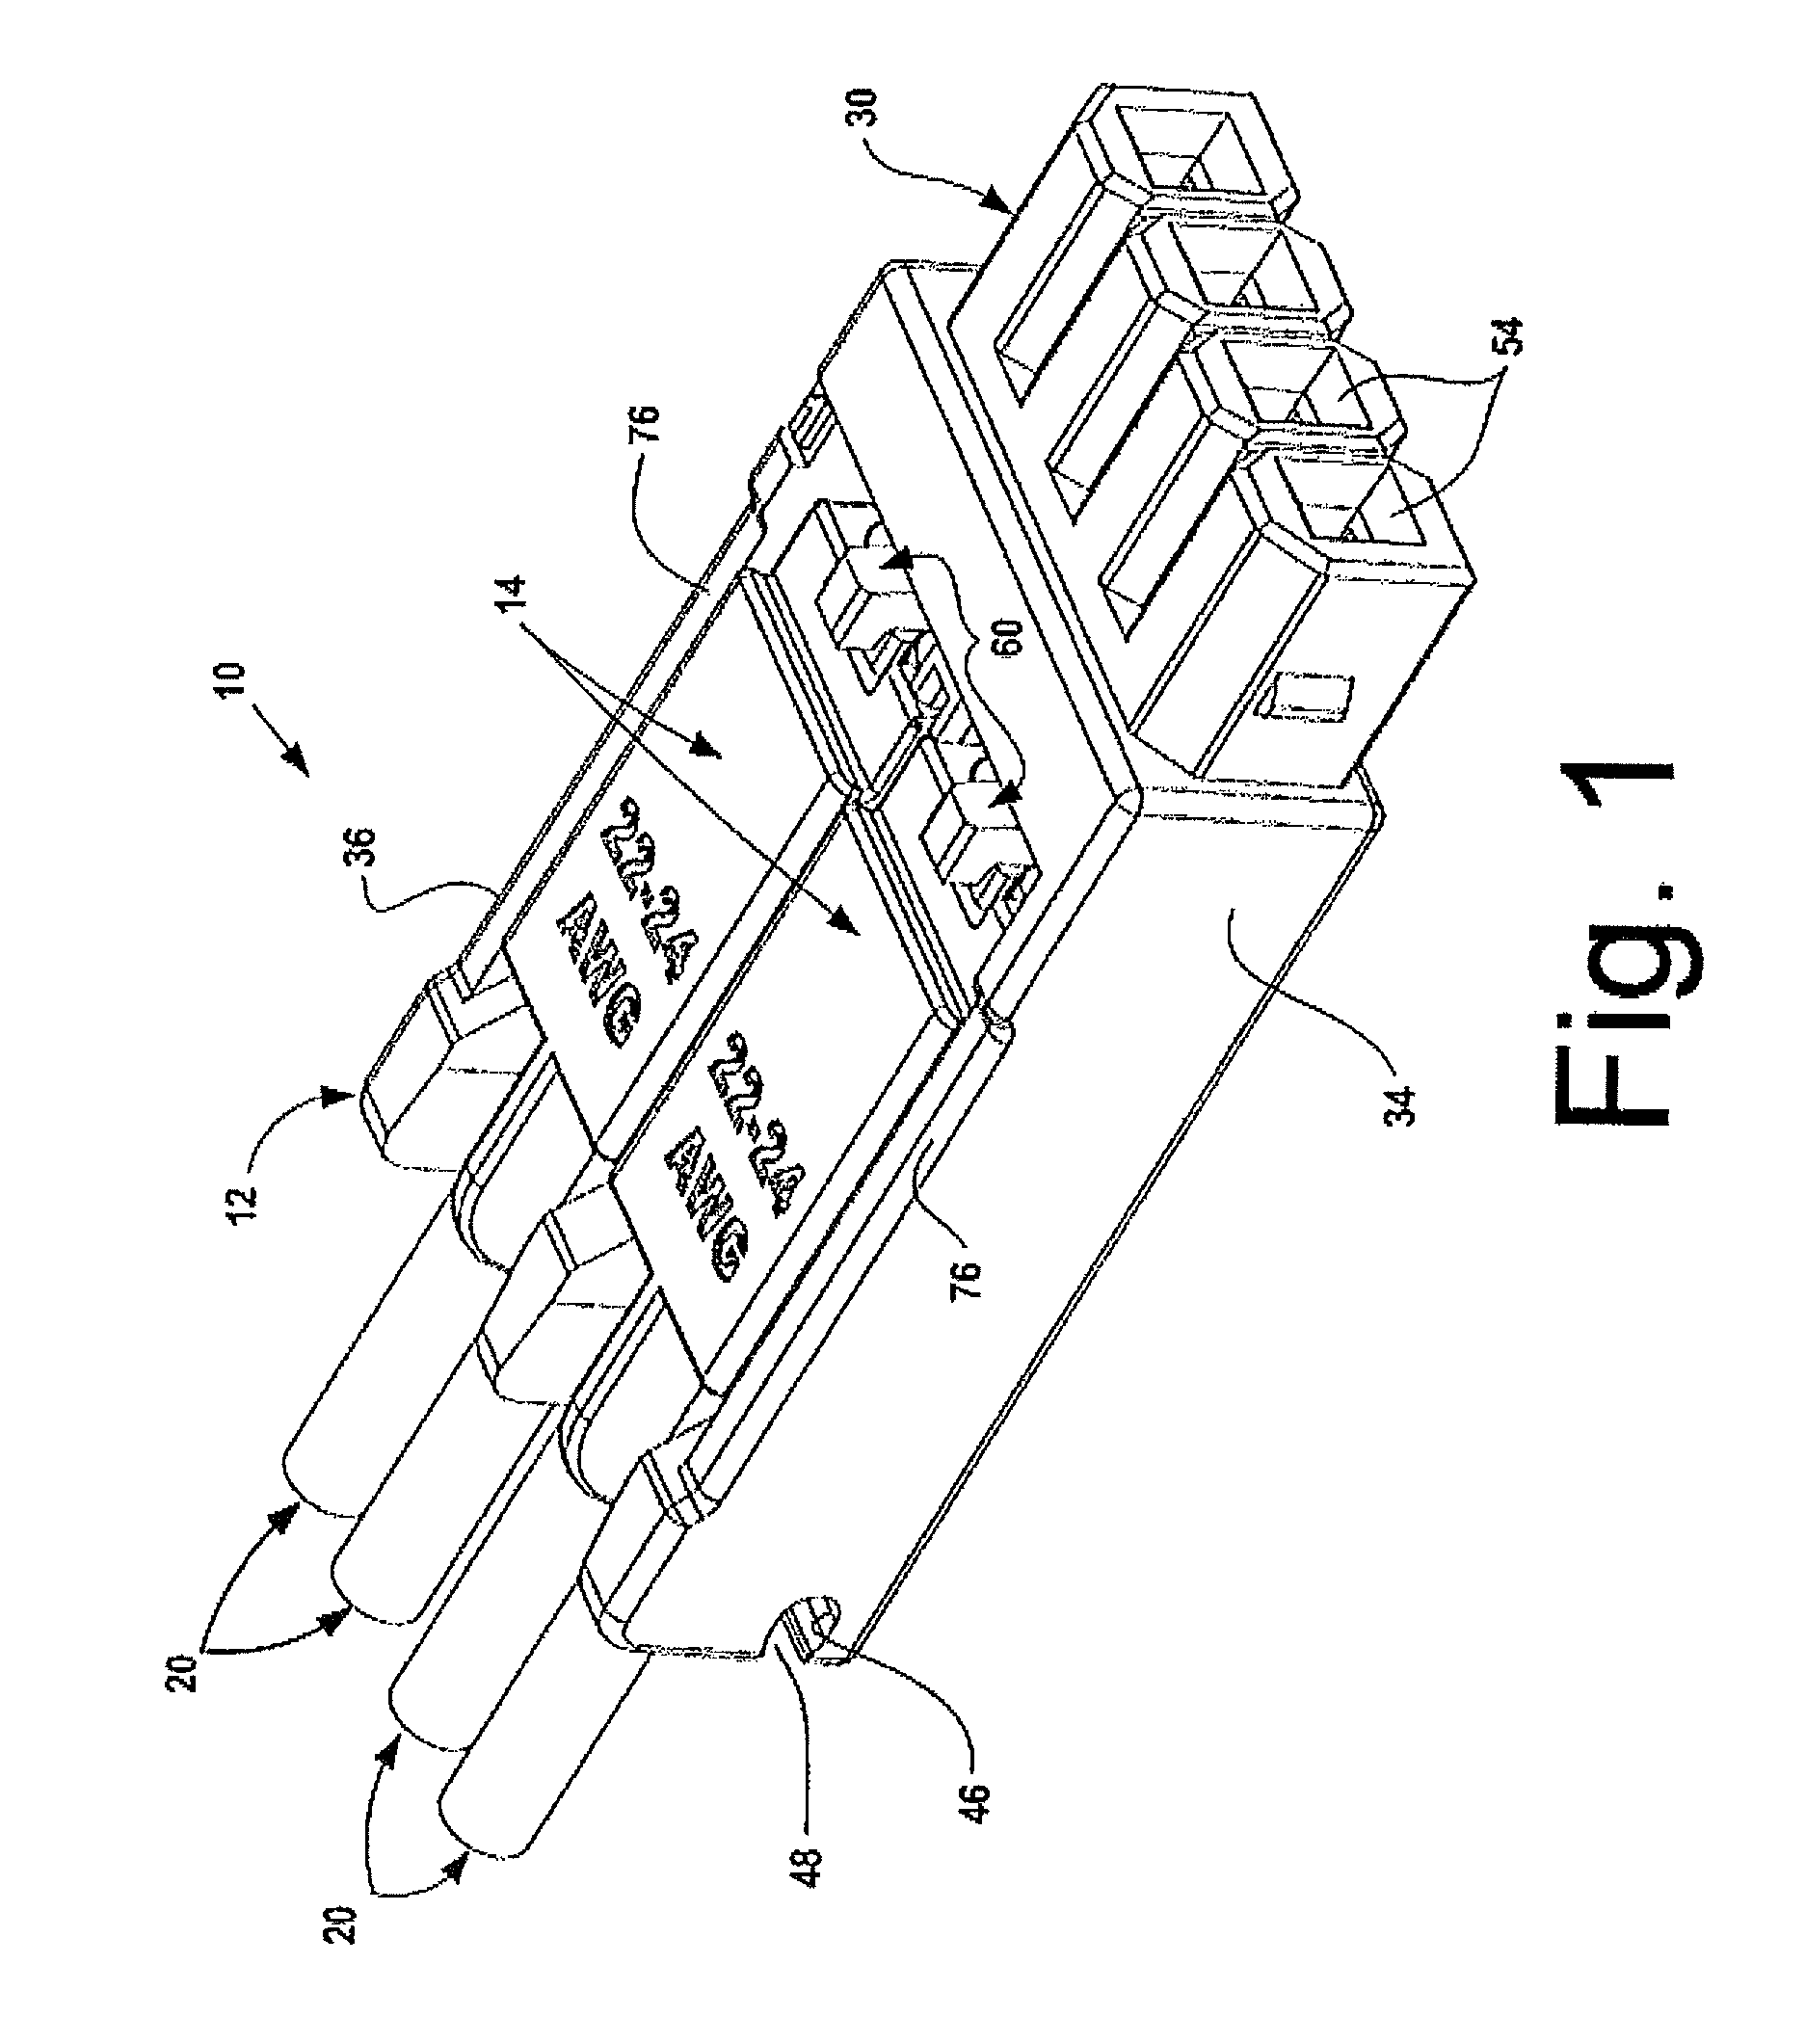 Electrical connector assembly and method